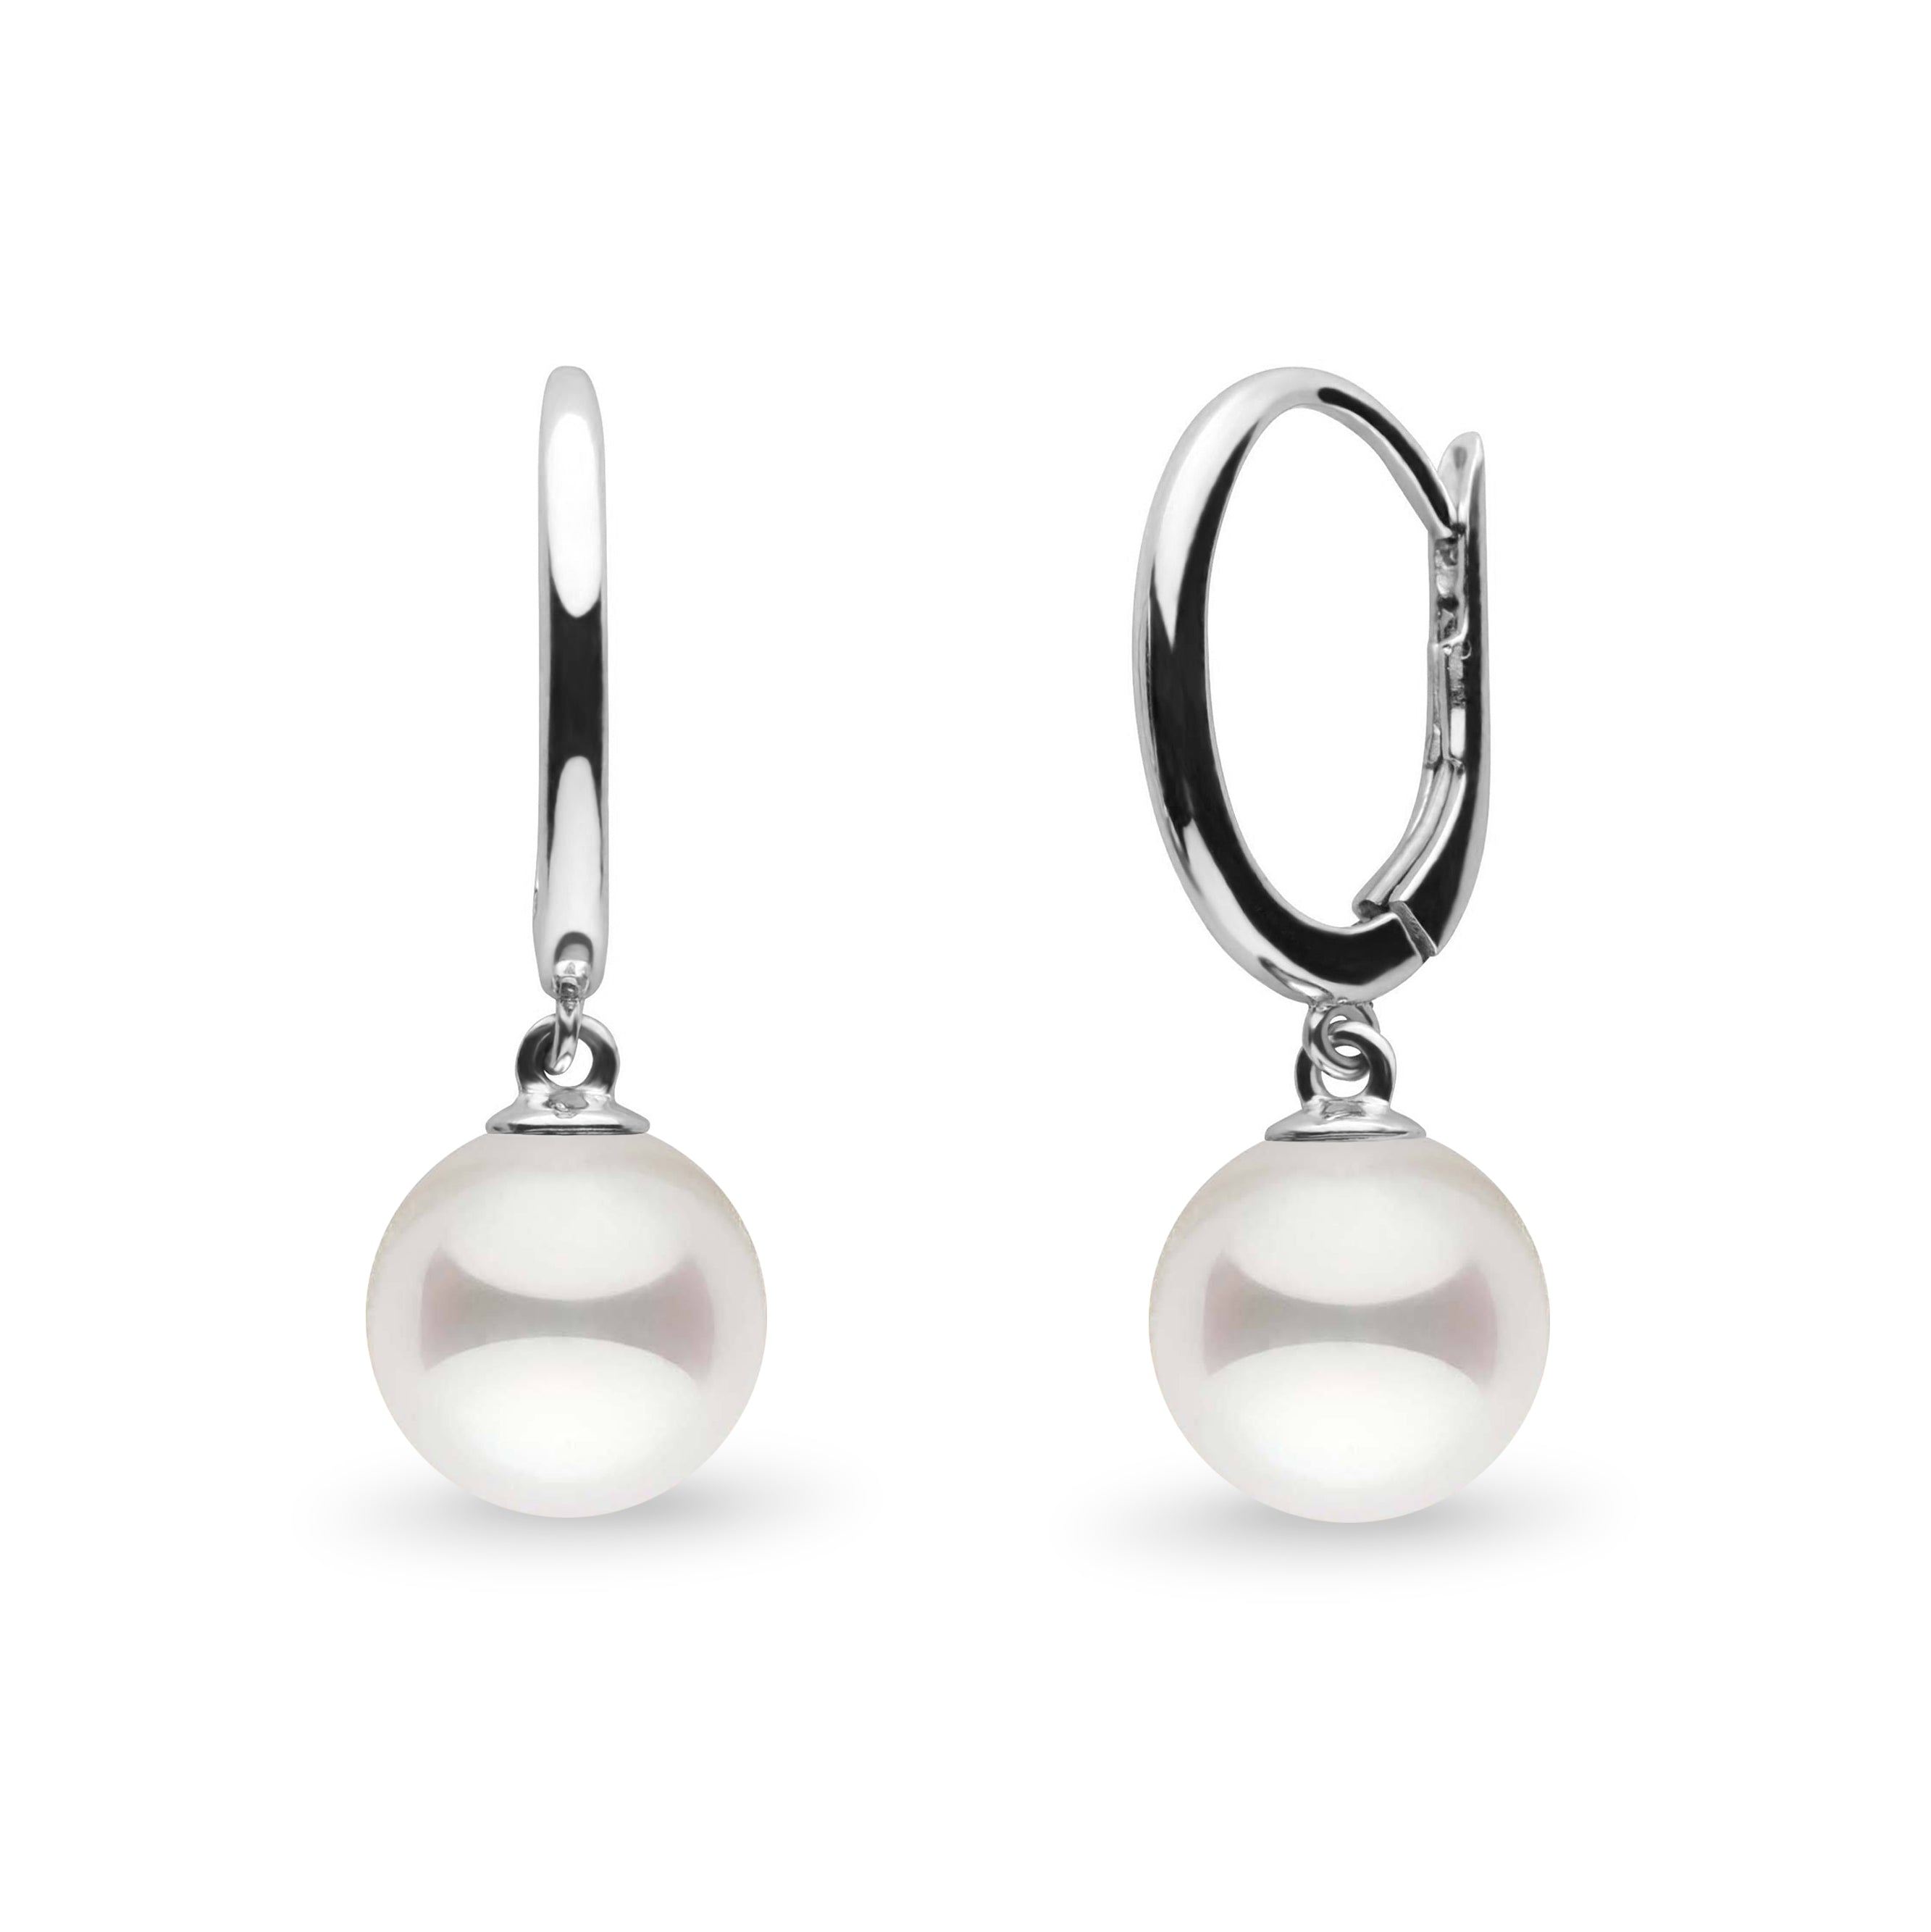 Solid Eternal Collection White Akoya 7.0-7.5 mm Pearl Dangle Earrings white gold